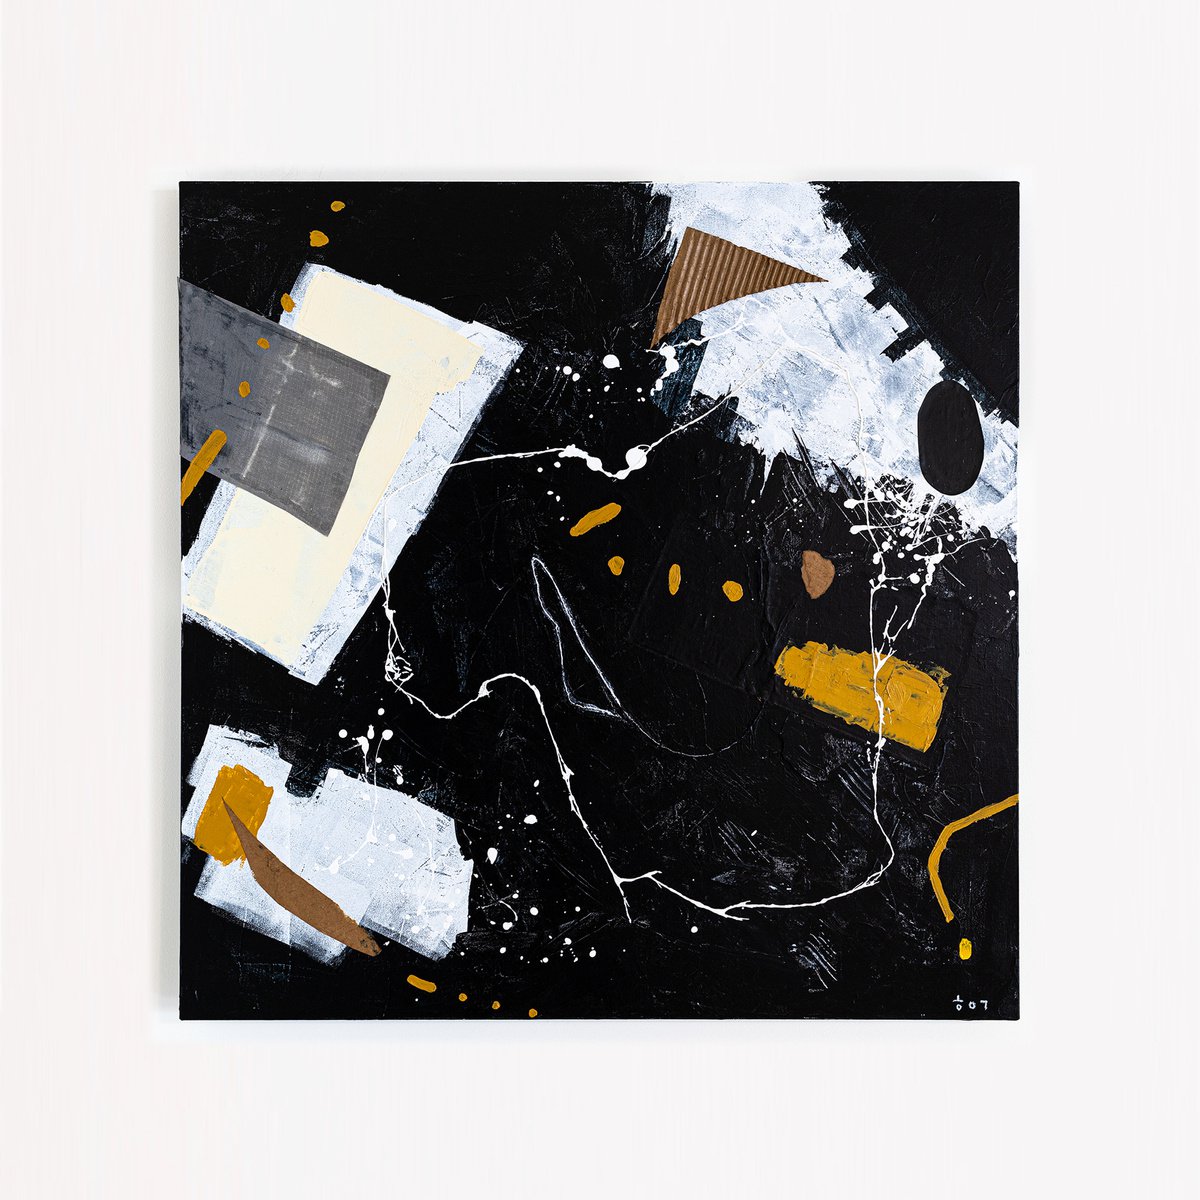 Abstract Painting - Black abstract with objects (40x40 | 101x101 cm) by Hyunah Kim